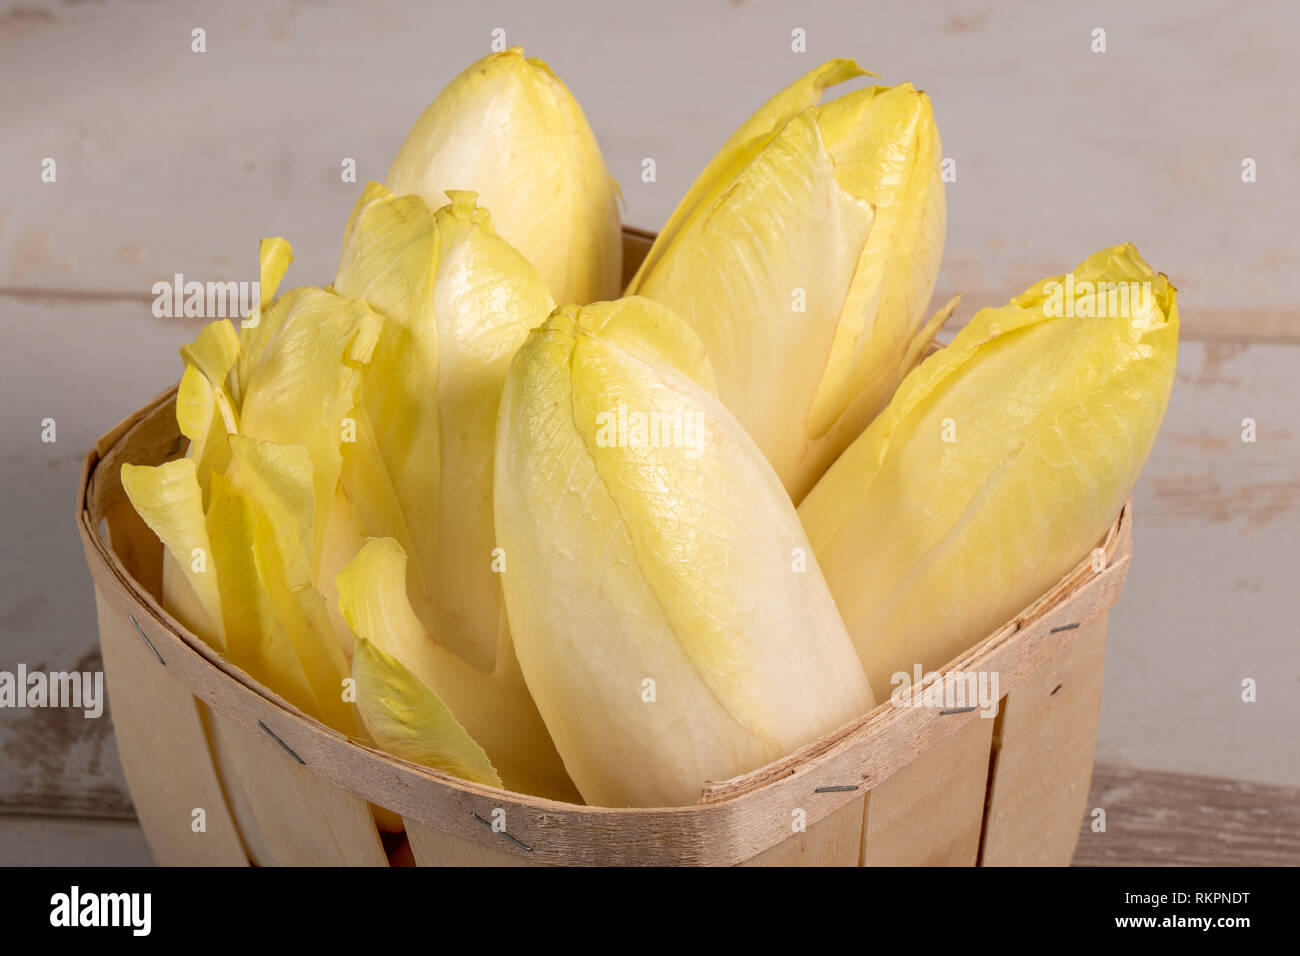 delicious chicory endives from France or Belgium in a small wooden basket Stock Photo